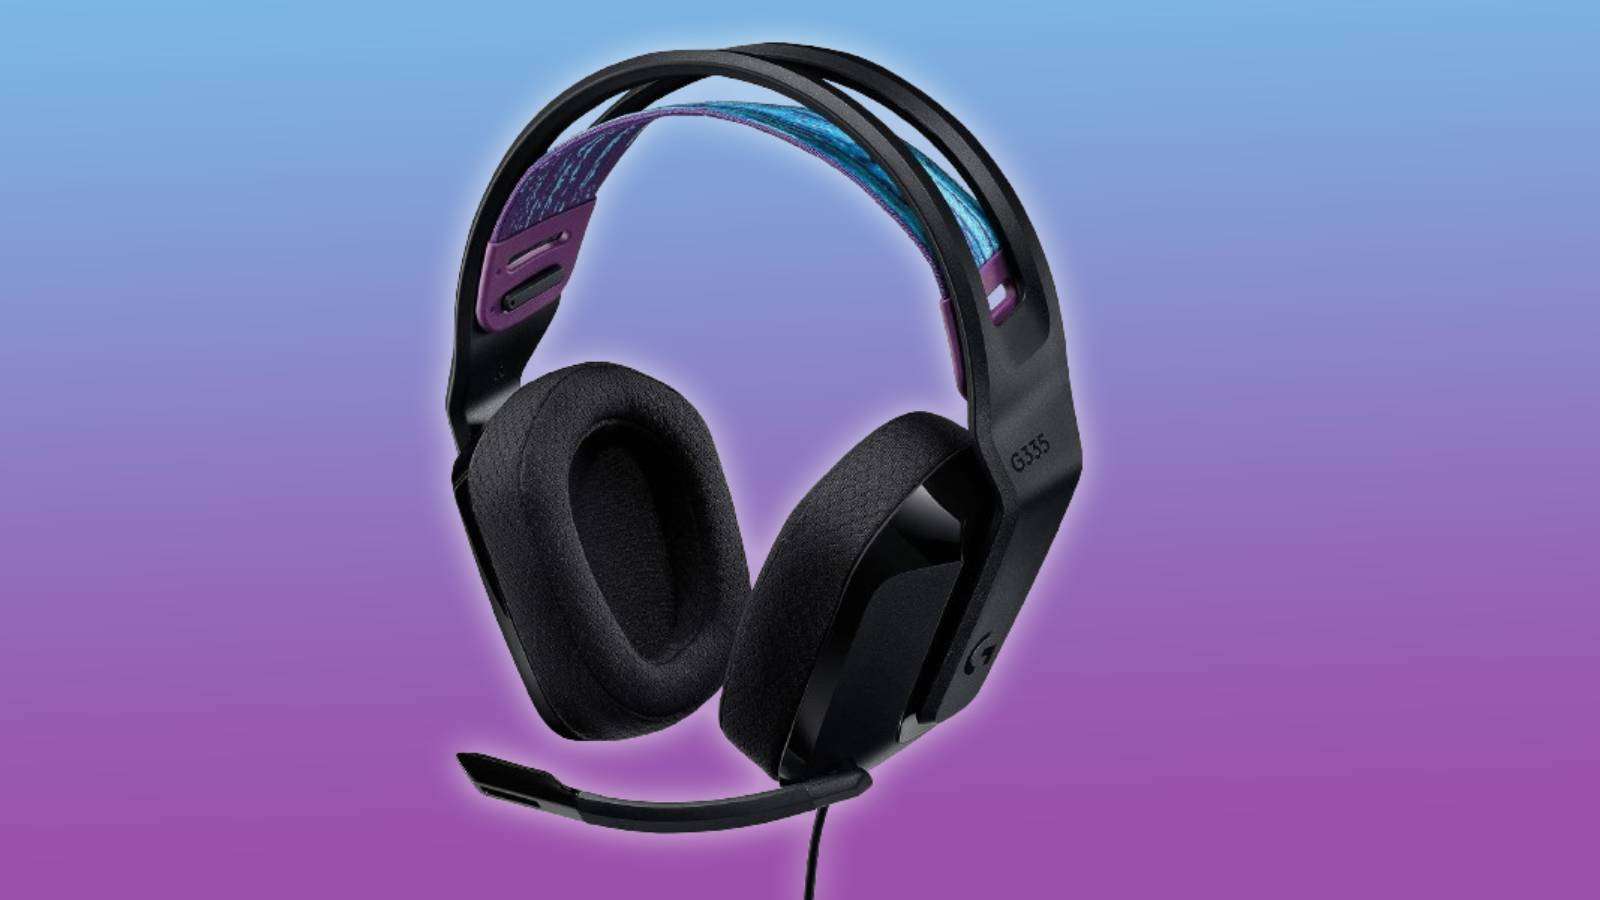 Image of the Logitech G335 Wired Gaming Headset on a purple and blue background.